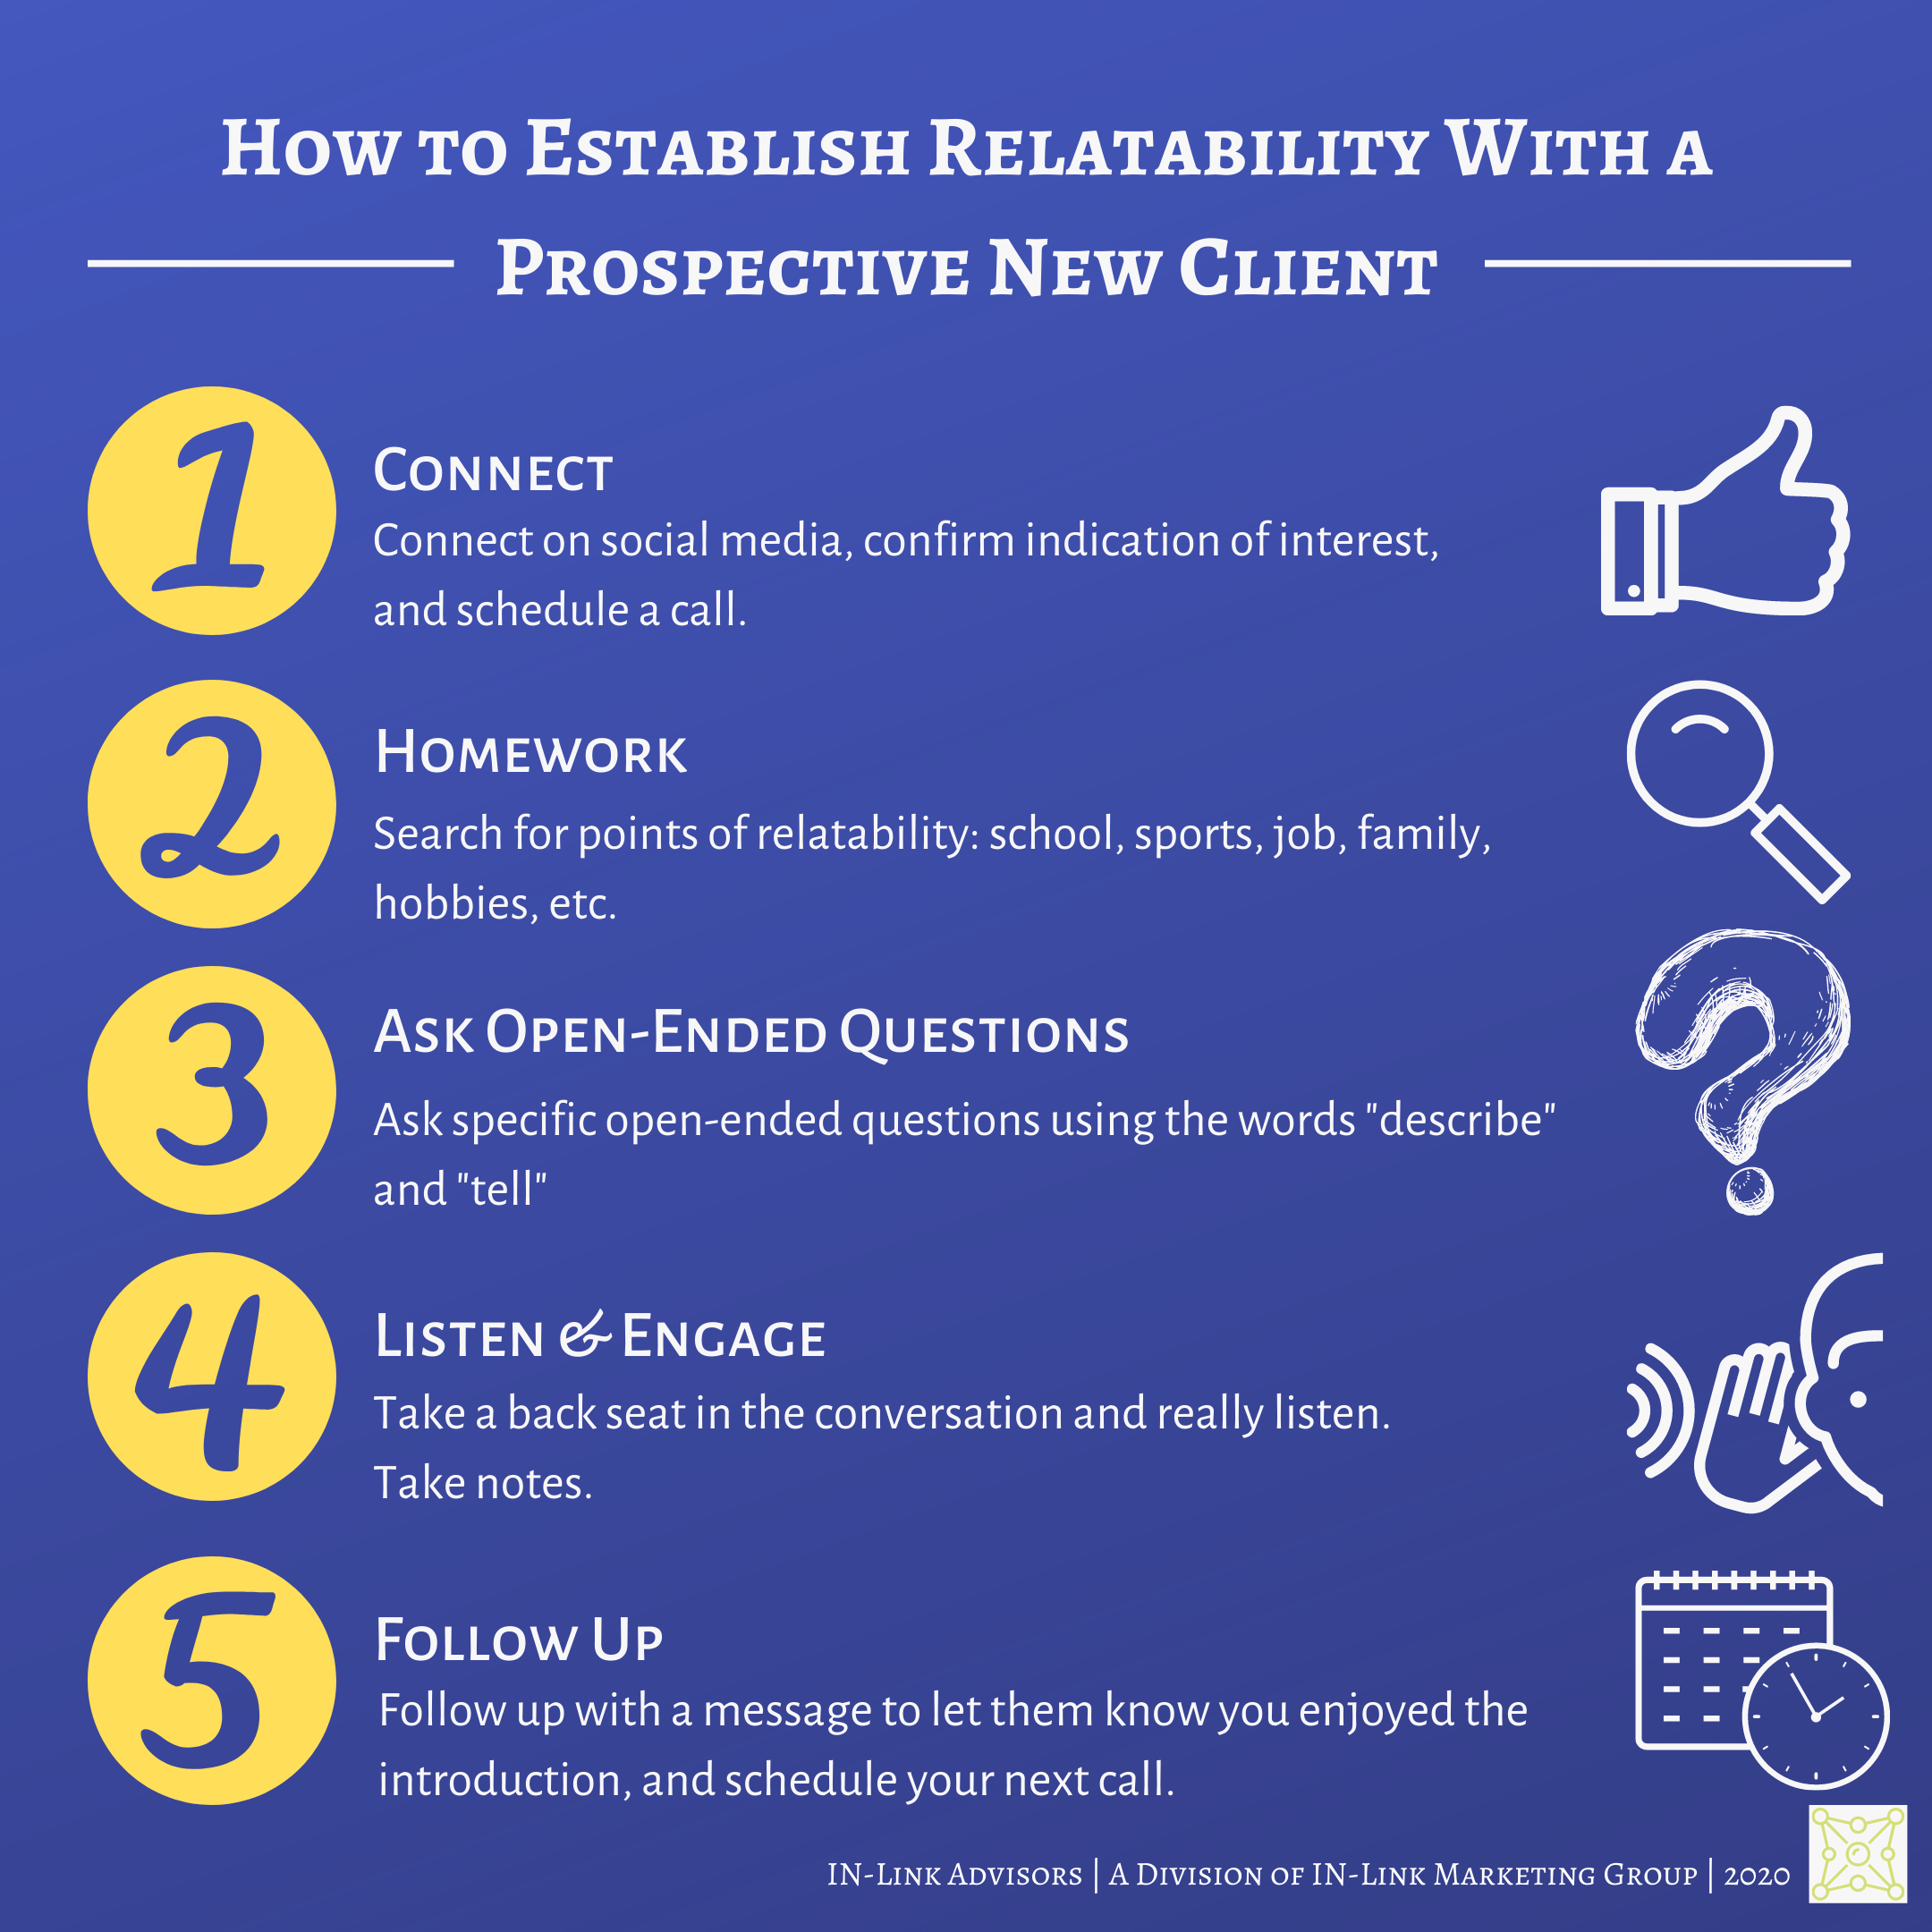 How to Establish Relatability, in-link advisors, cold-click, cold-click marketing, how to be relatable, #relatable, relevant, business relationships, how to close business